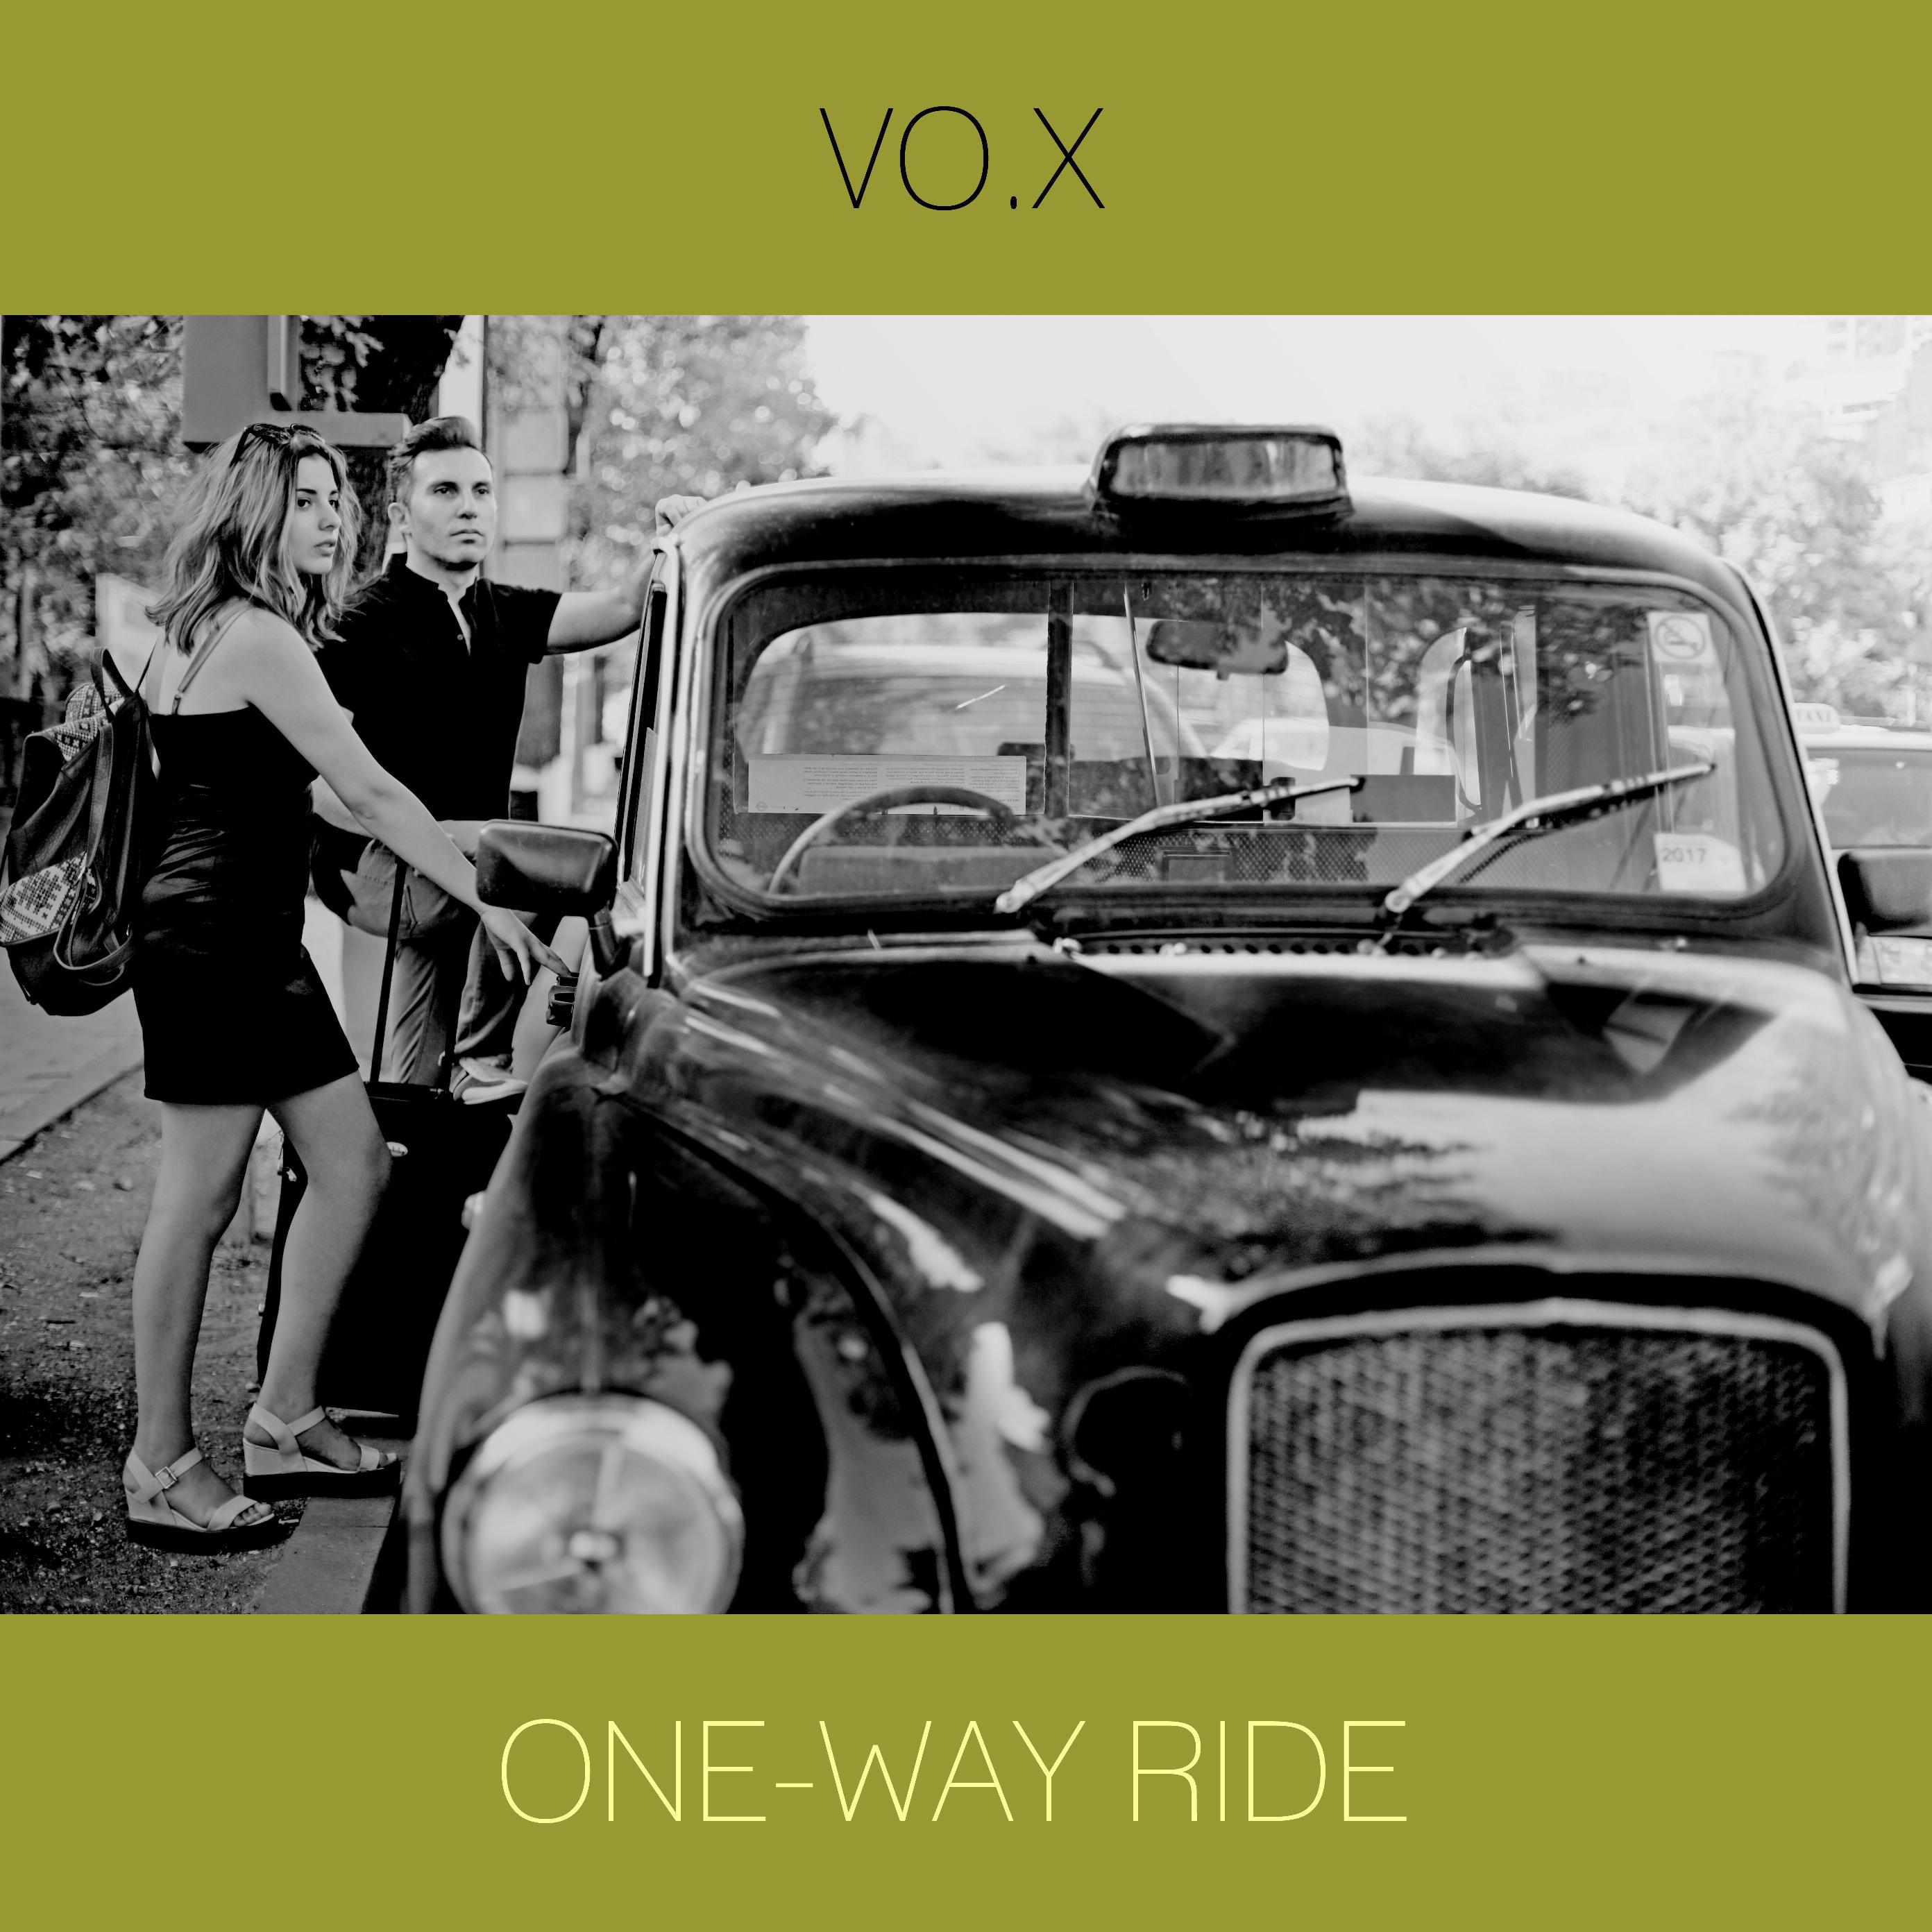 One-Way Ride